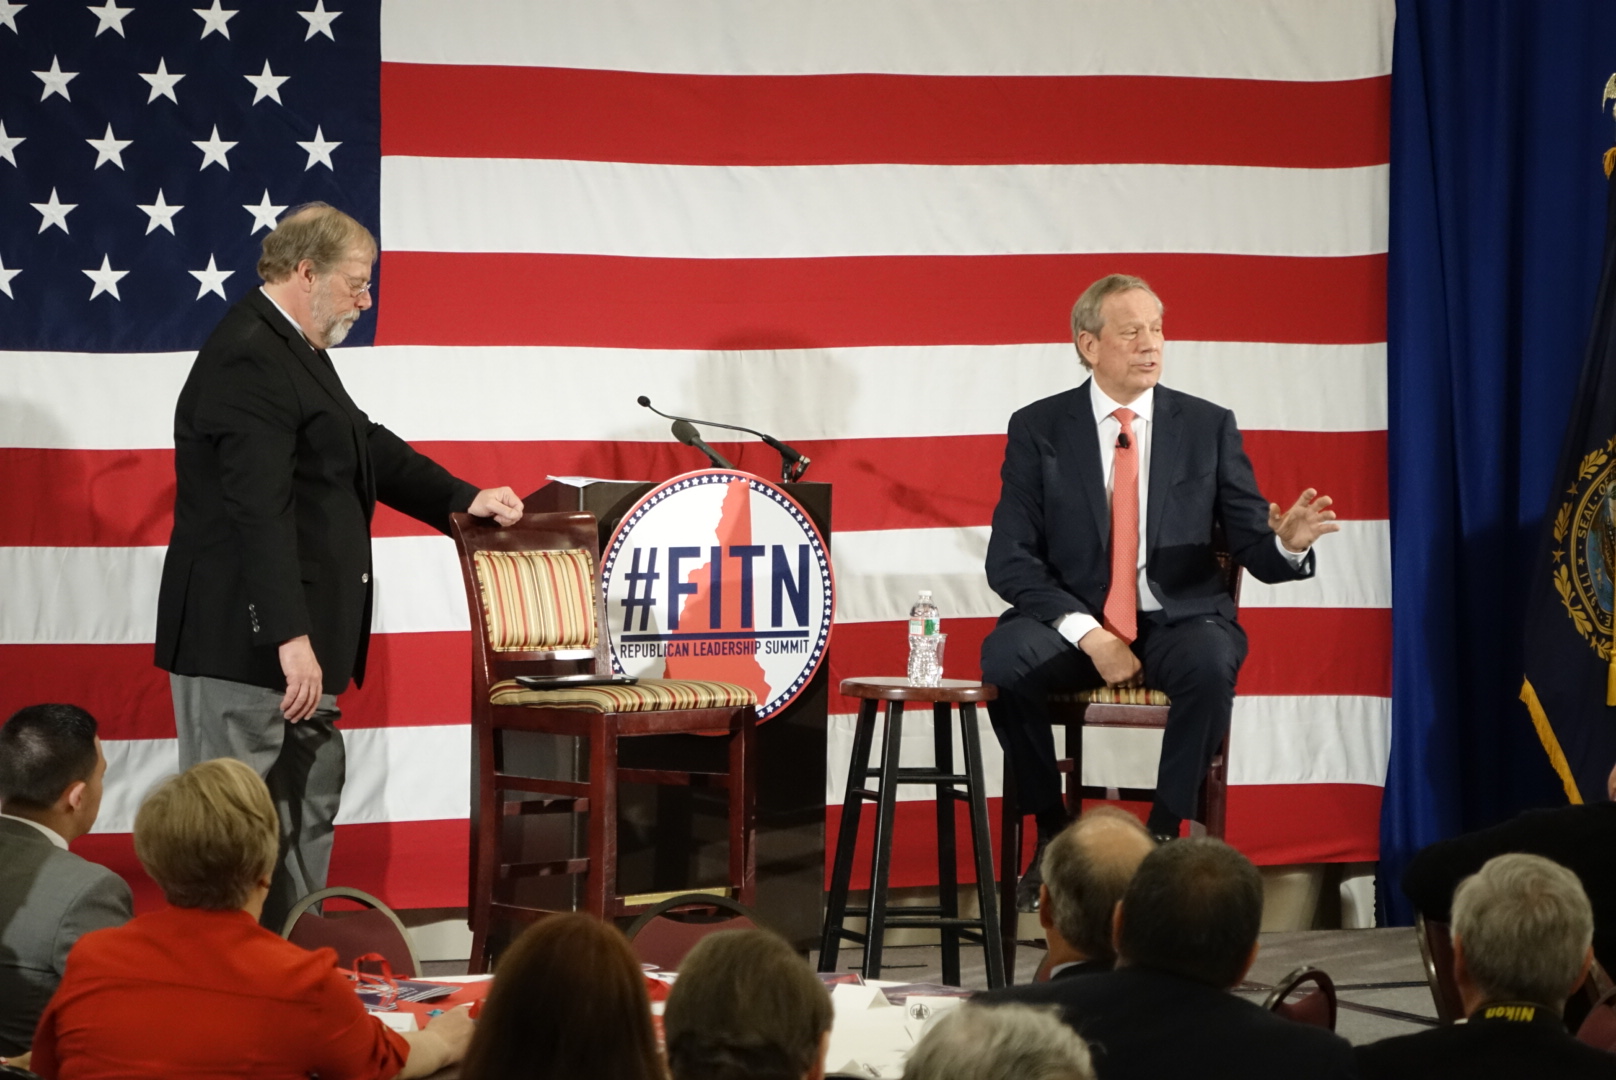 George Pataki onstage at the New Hampshire Republican Party Leadership Summit.  4/17/15